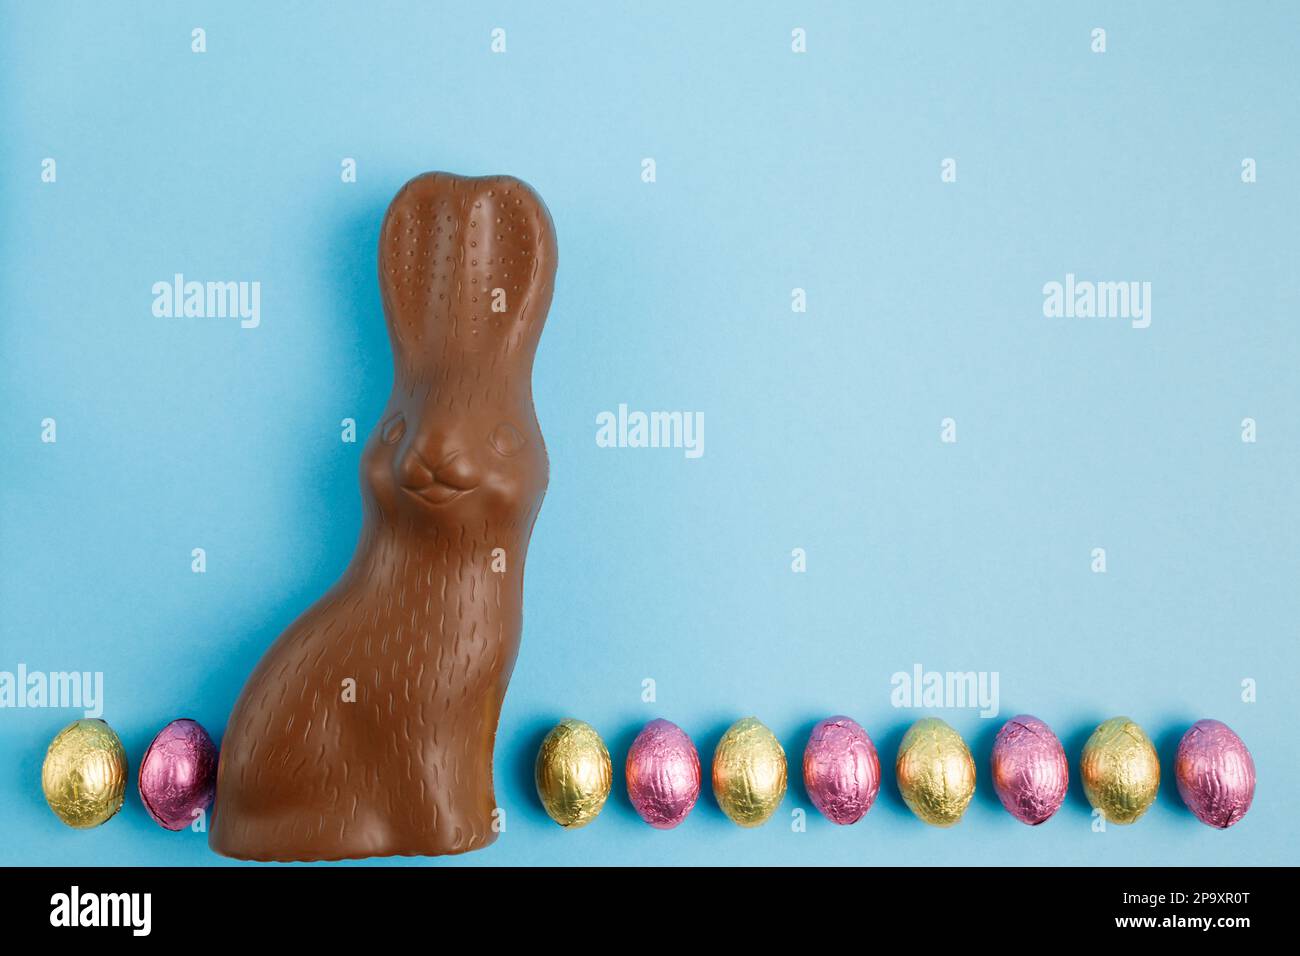 Milk chocolate bunny and row of Easter candy eggs wrapped in pink and golden foil on blue background. Happy Easter concept. Preparation for holiday. S Stock Photo